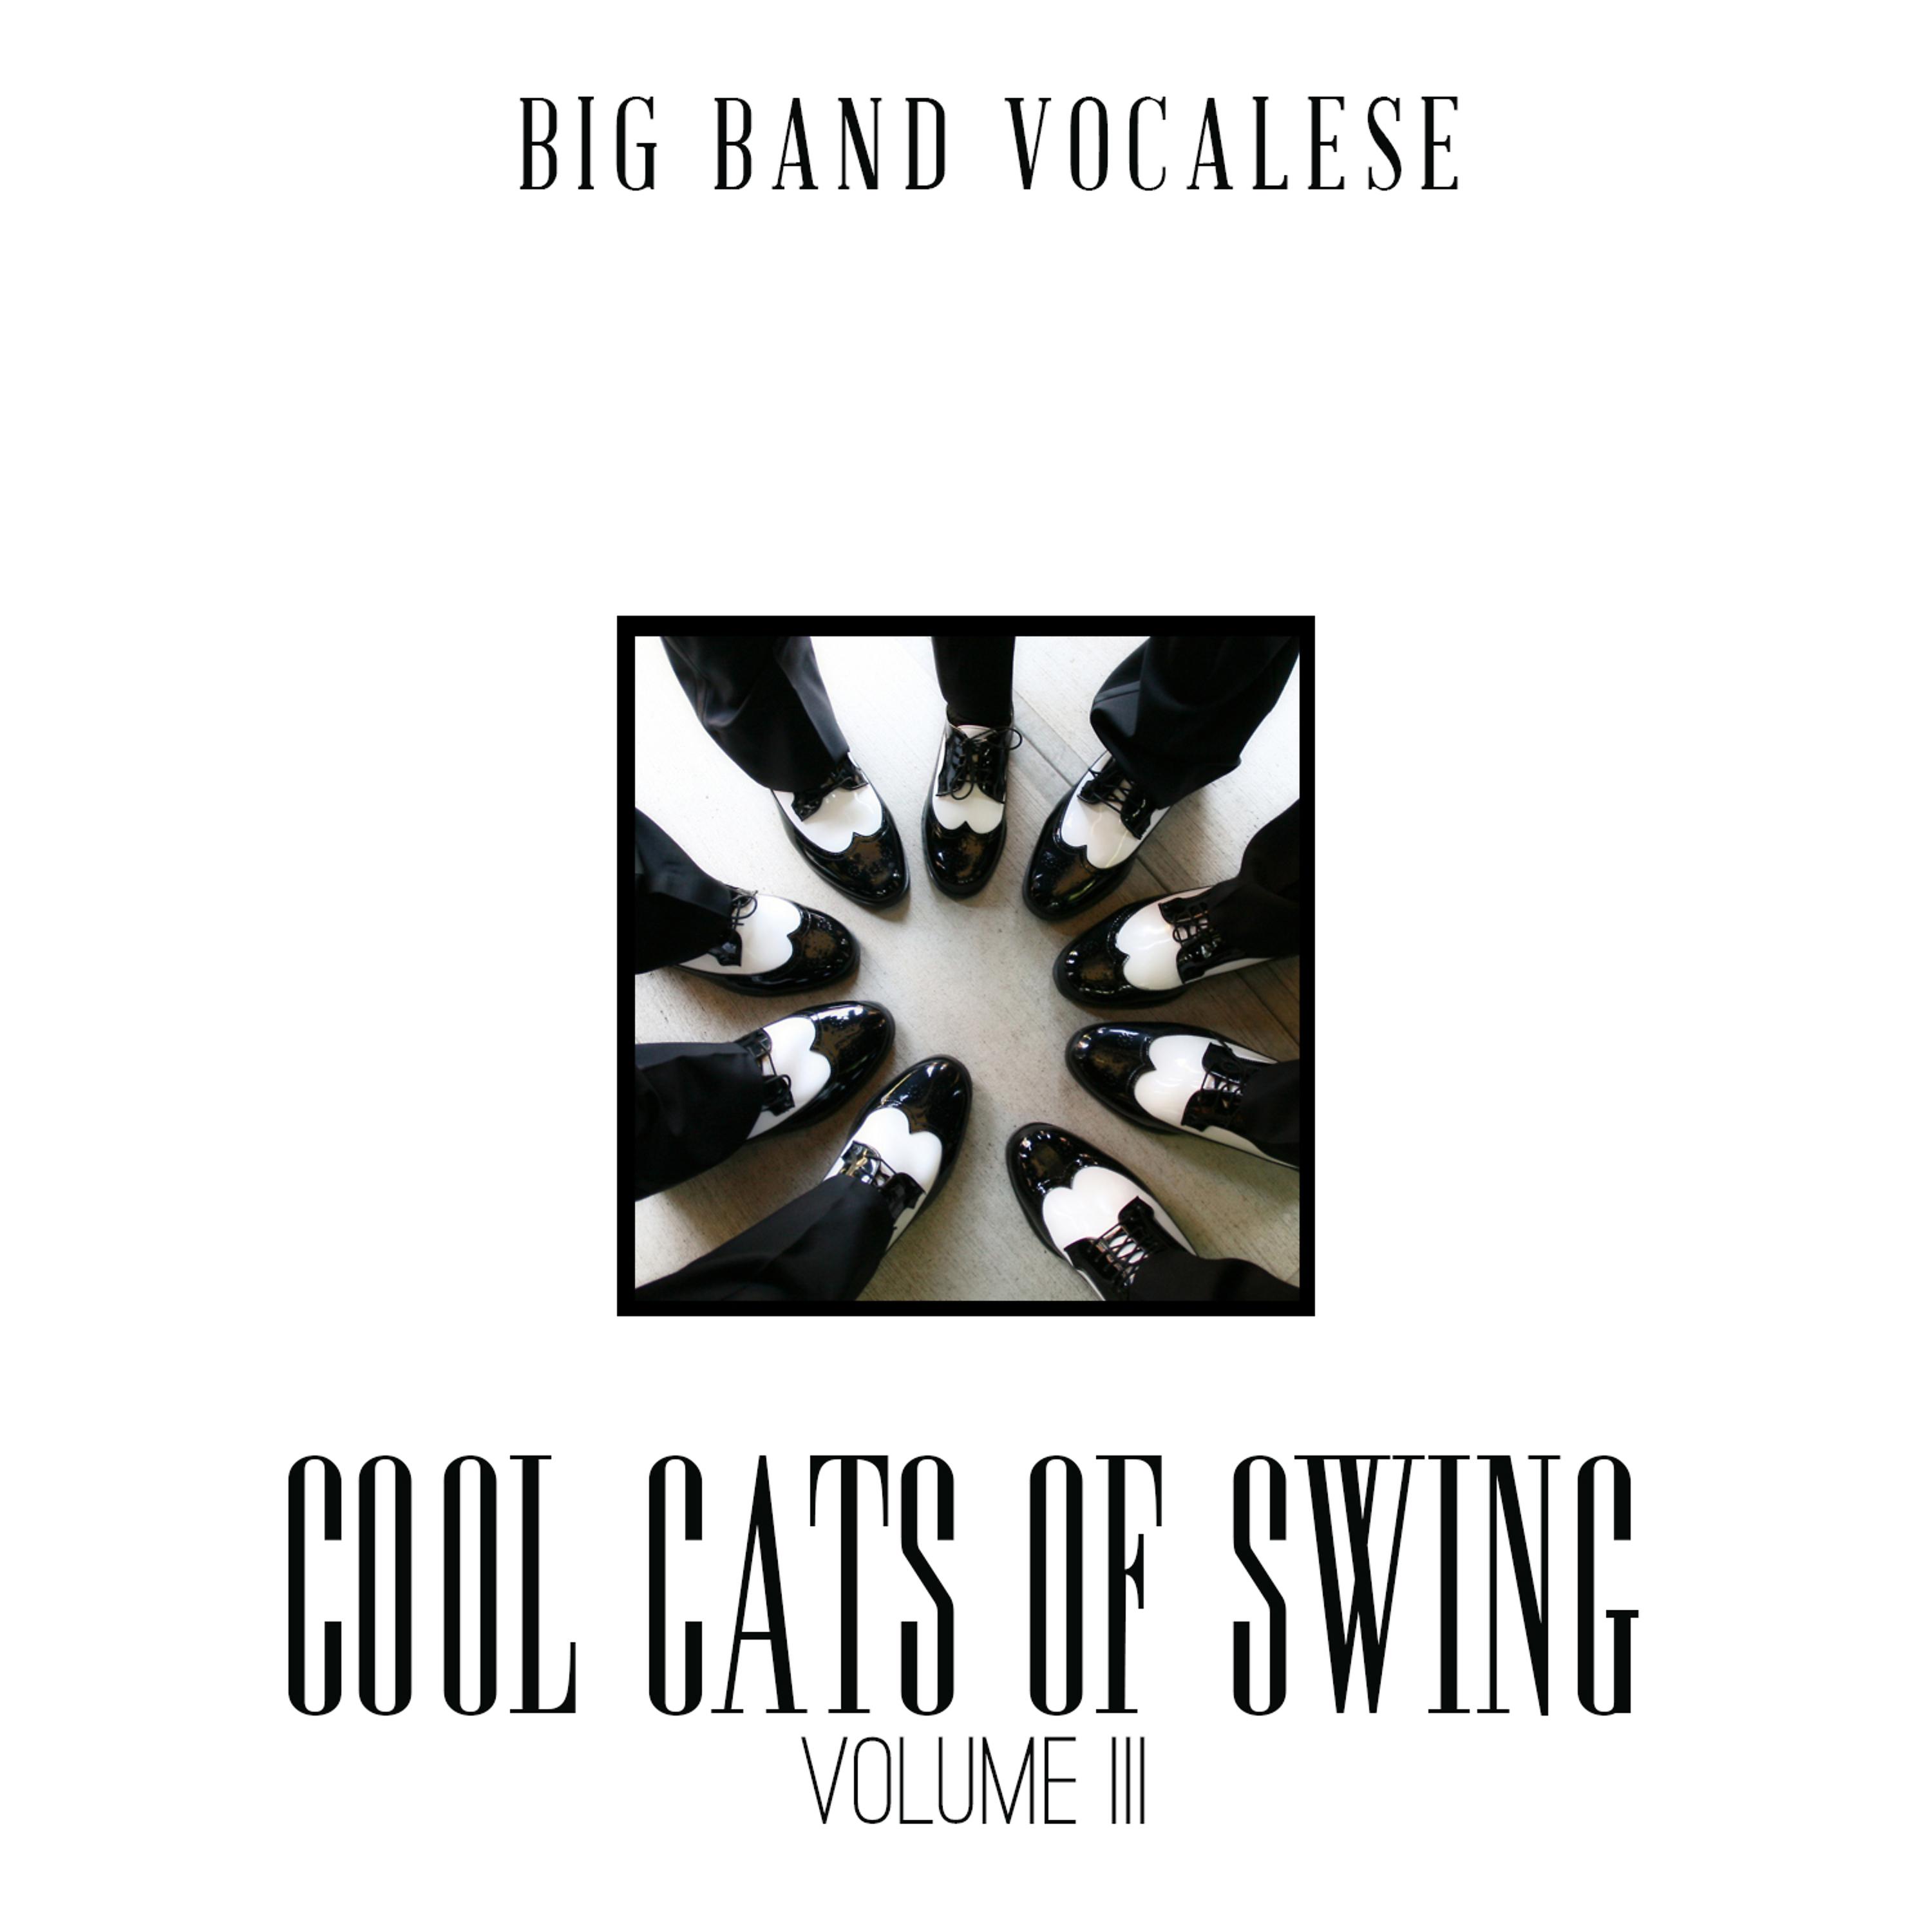 Постер альбома Big Band Music Vocalese: Cool Cats of Swing, Vol. 3